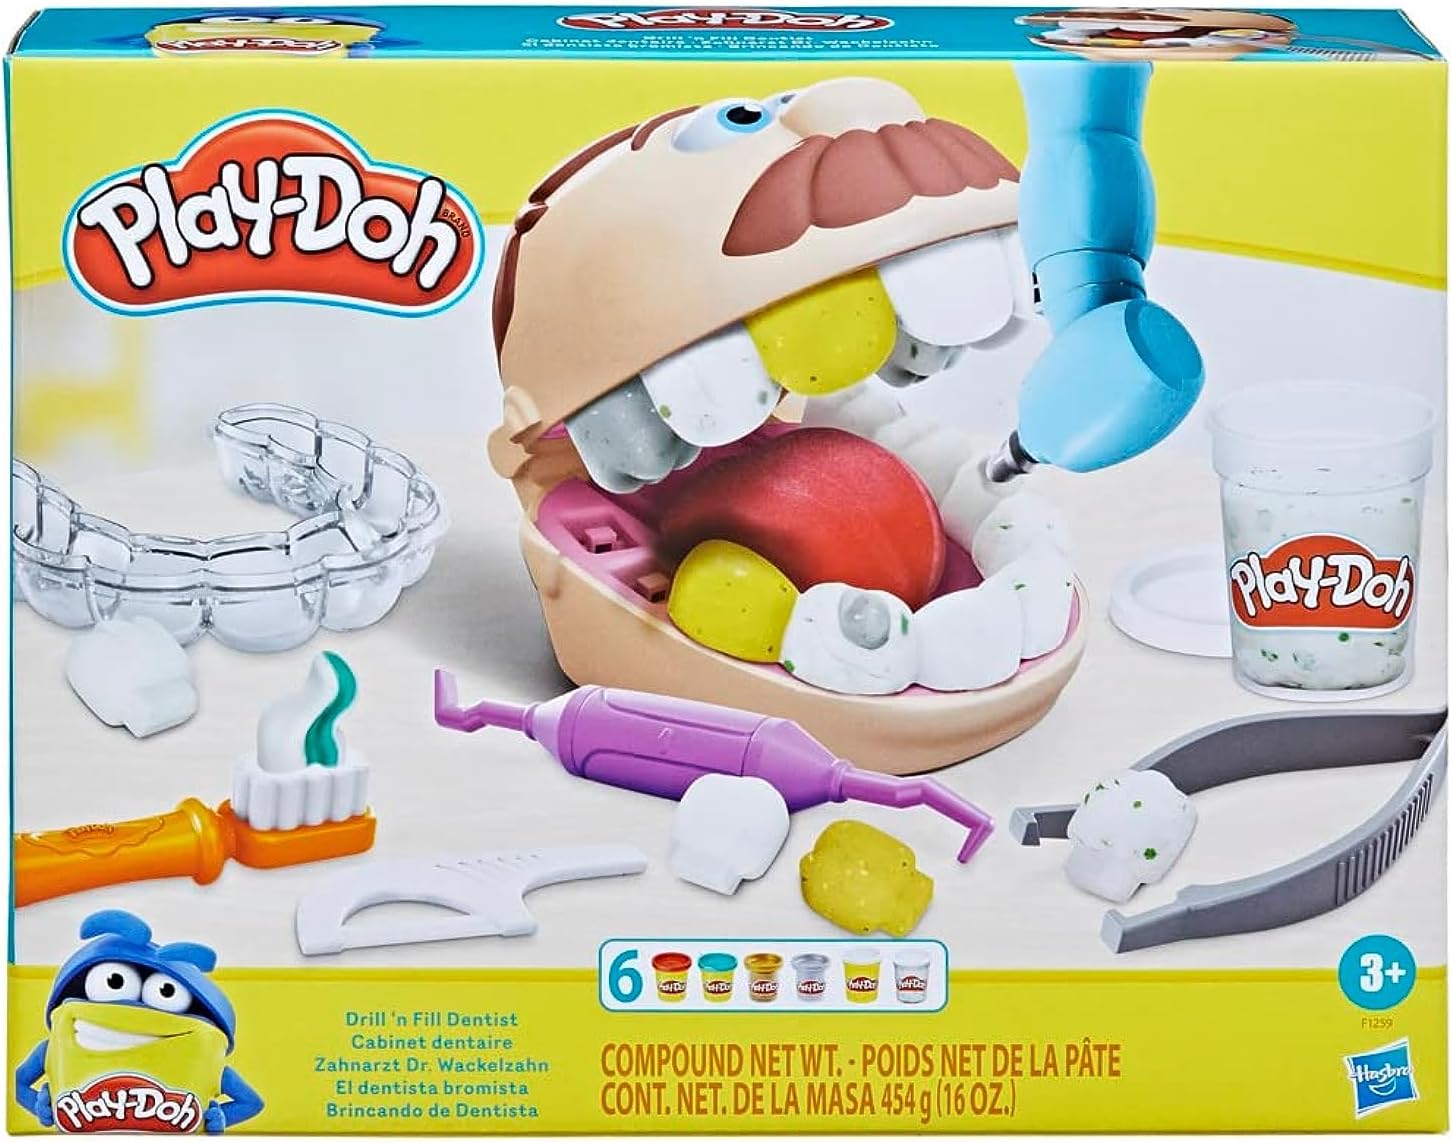 Play-Doh Drill 'n Fill Dentist Toy for Kids 3 Years and Up with Cavity and Metallic Colored Modeling Compound